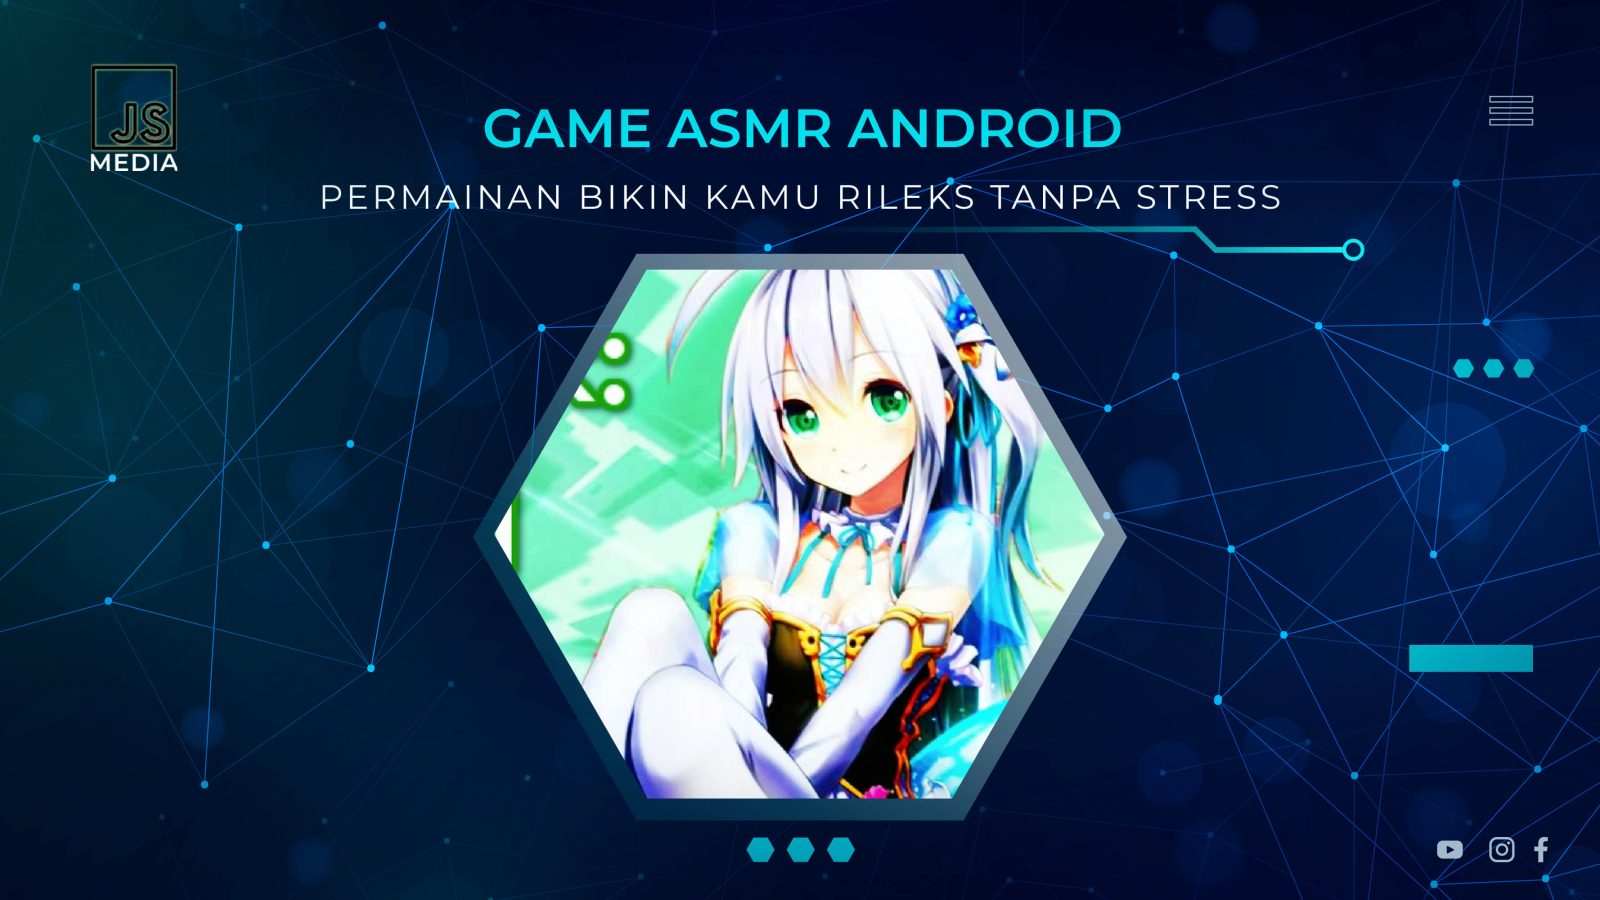 Game ASMR Android